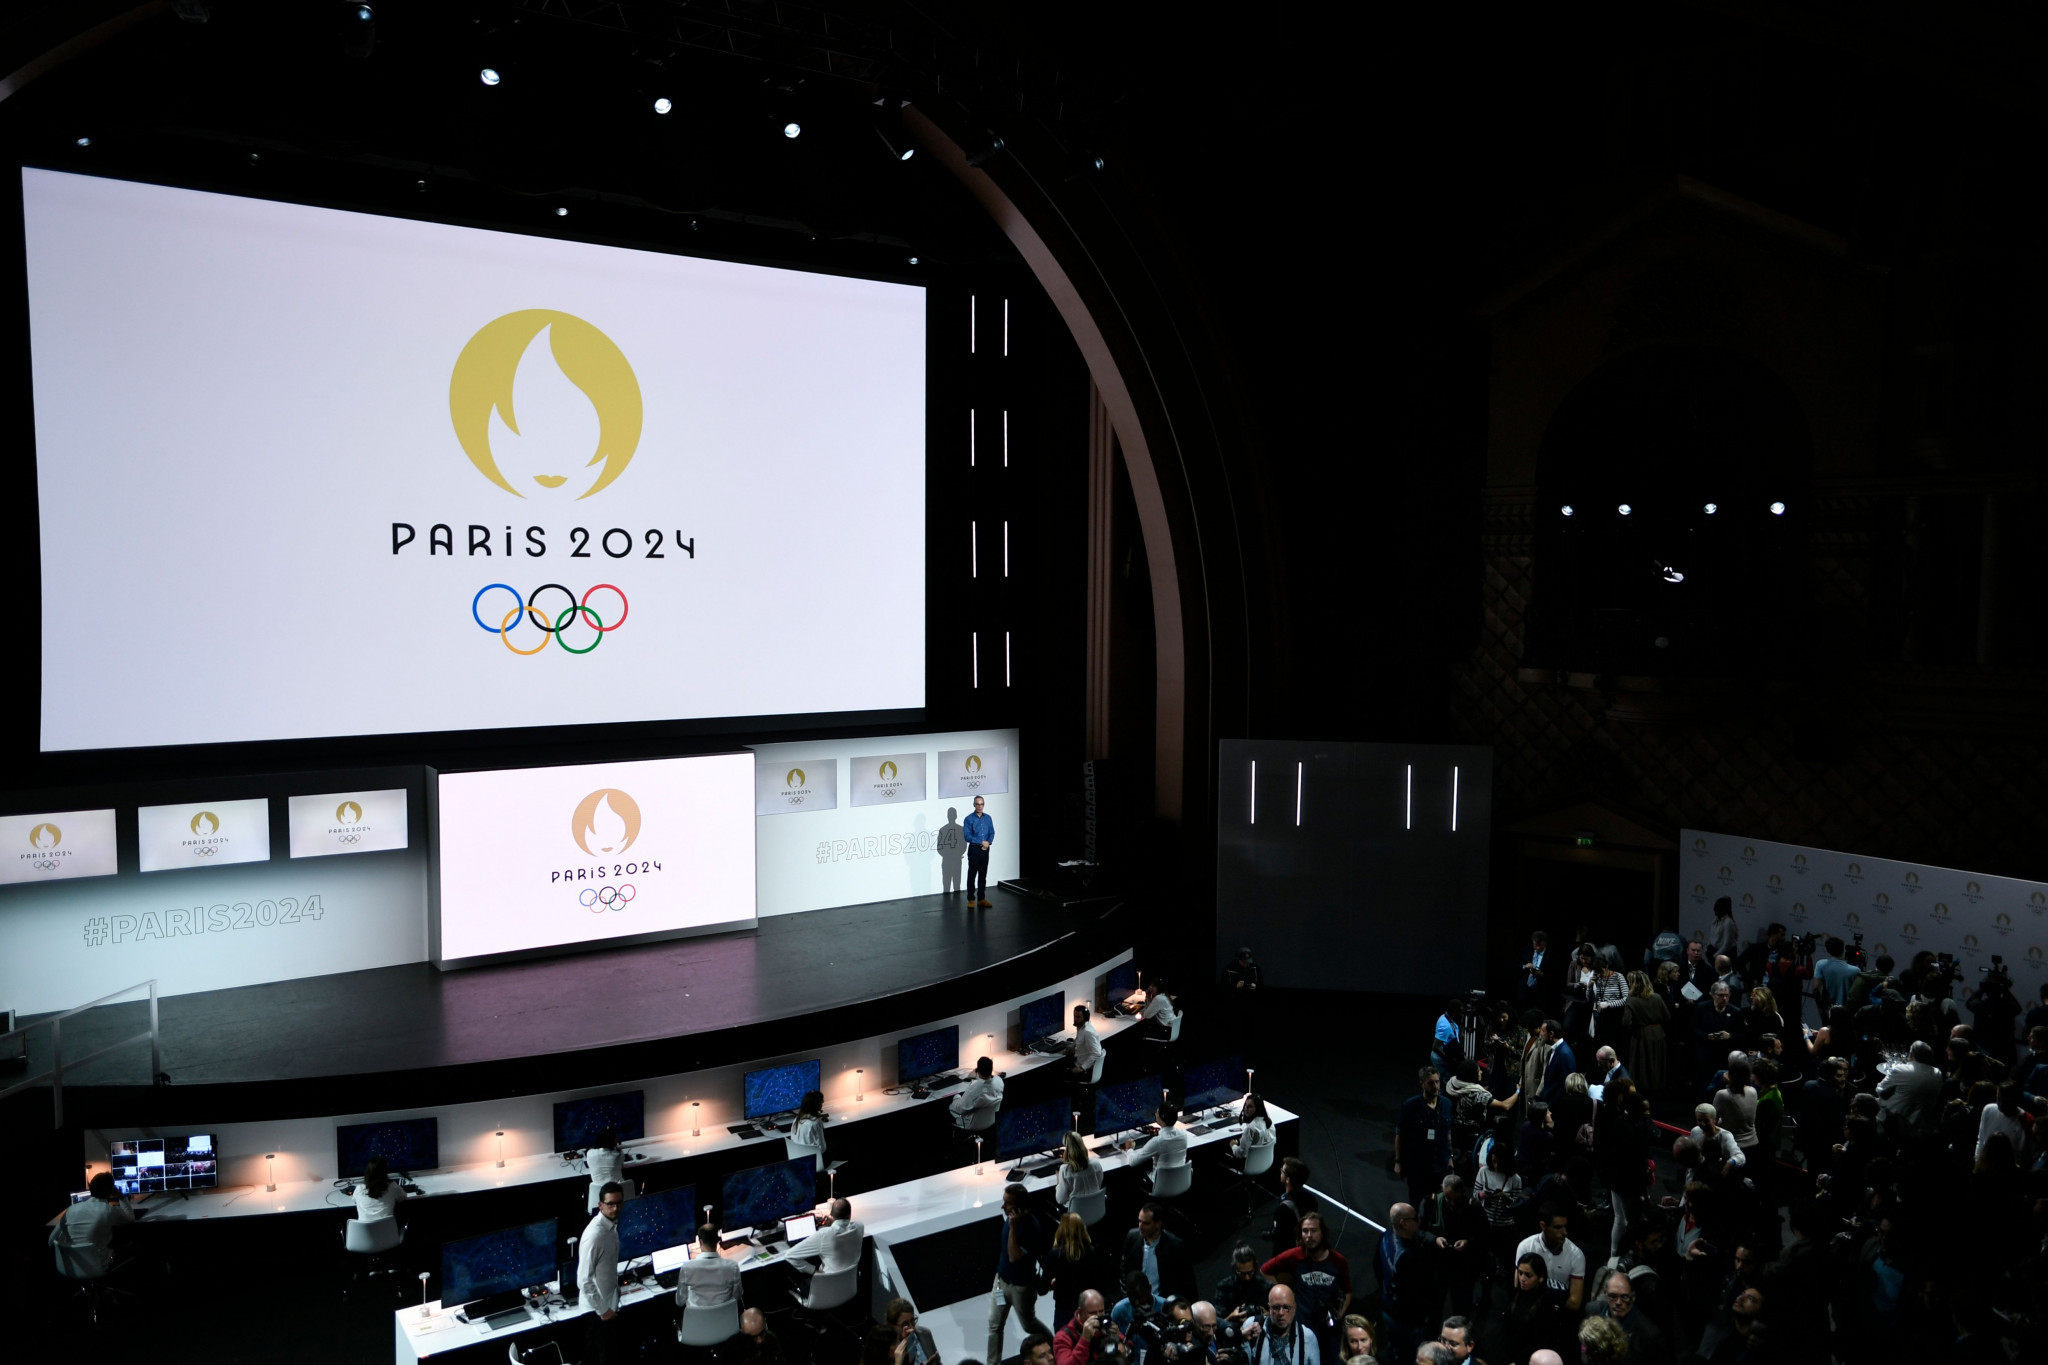 Paris 2024 and French Economic, Social and Environmental Council issue joint declaration